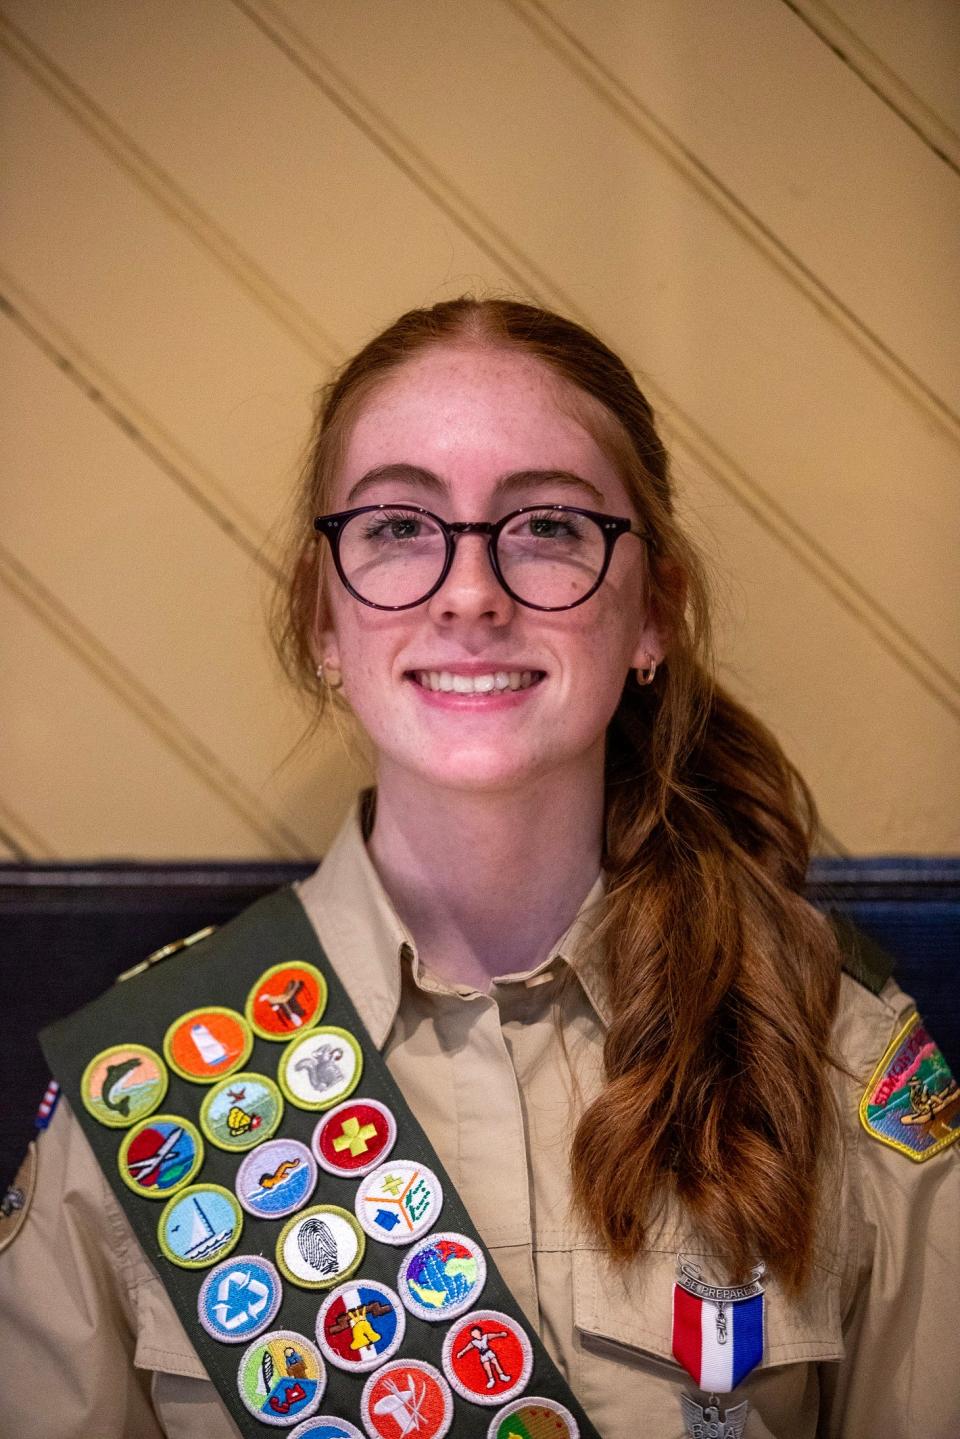 : Edi Fisher after the presentation of her Eagle Scout Badge at the Eagle Scout Court of Honor ceremony on Jan. 28 at the Bryn Du Mansion’s Carriage House. Edi Fisher is the first female in Granville to earn the Eagle Scout rank.